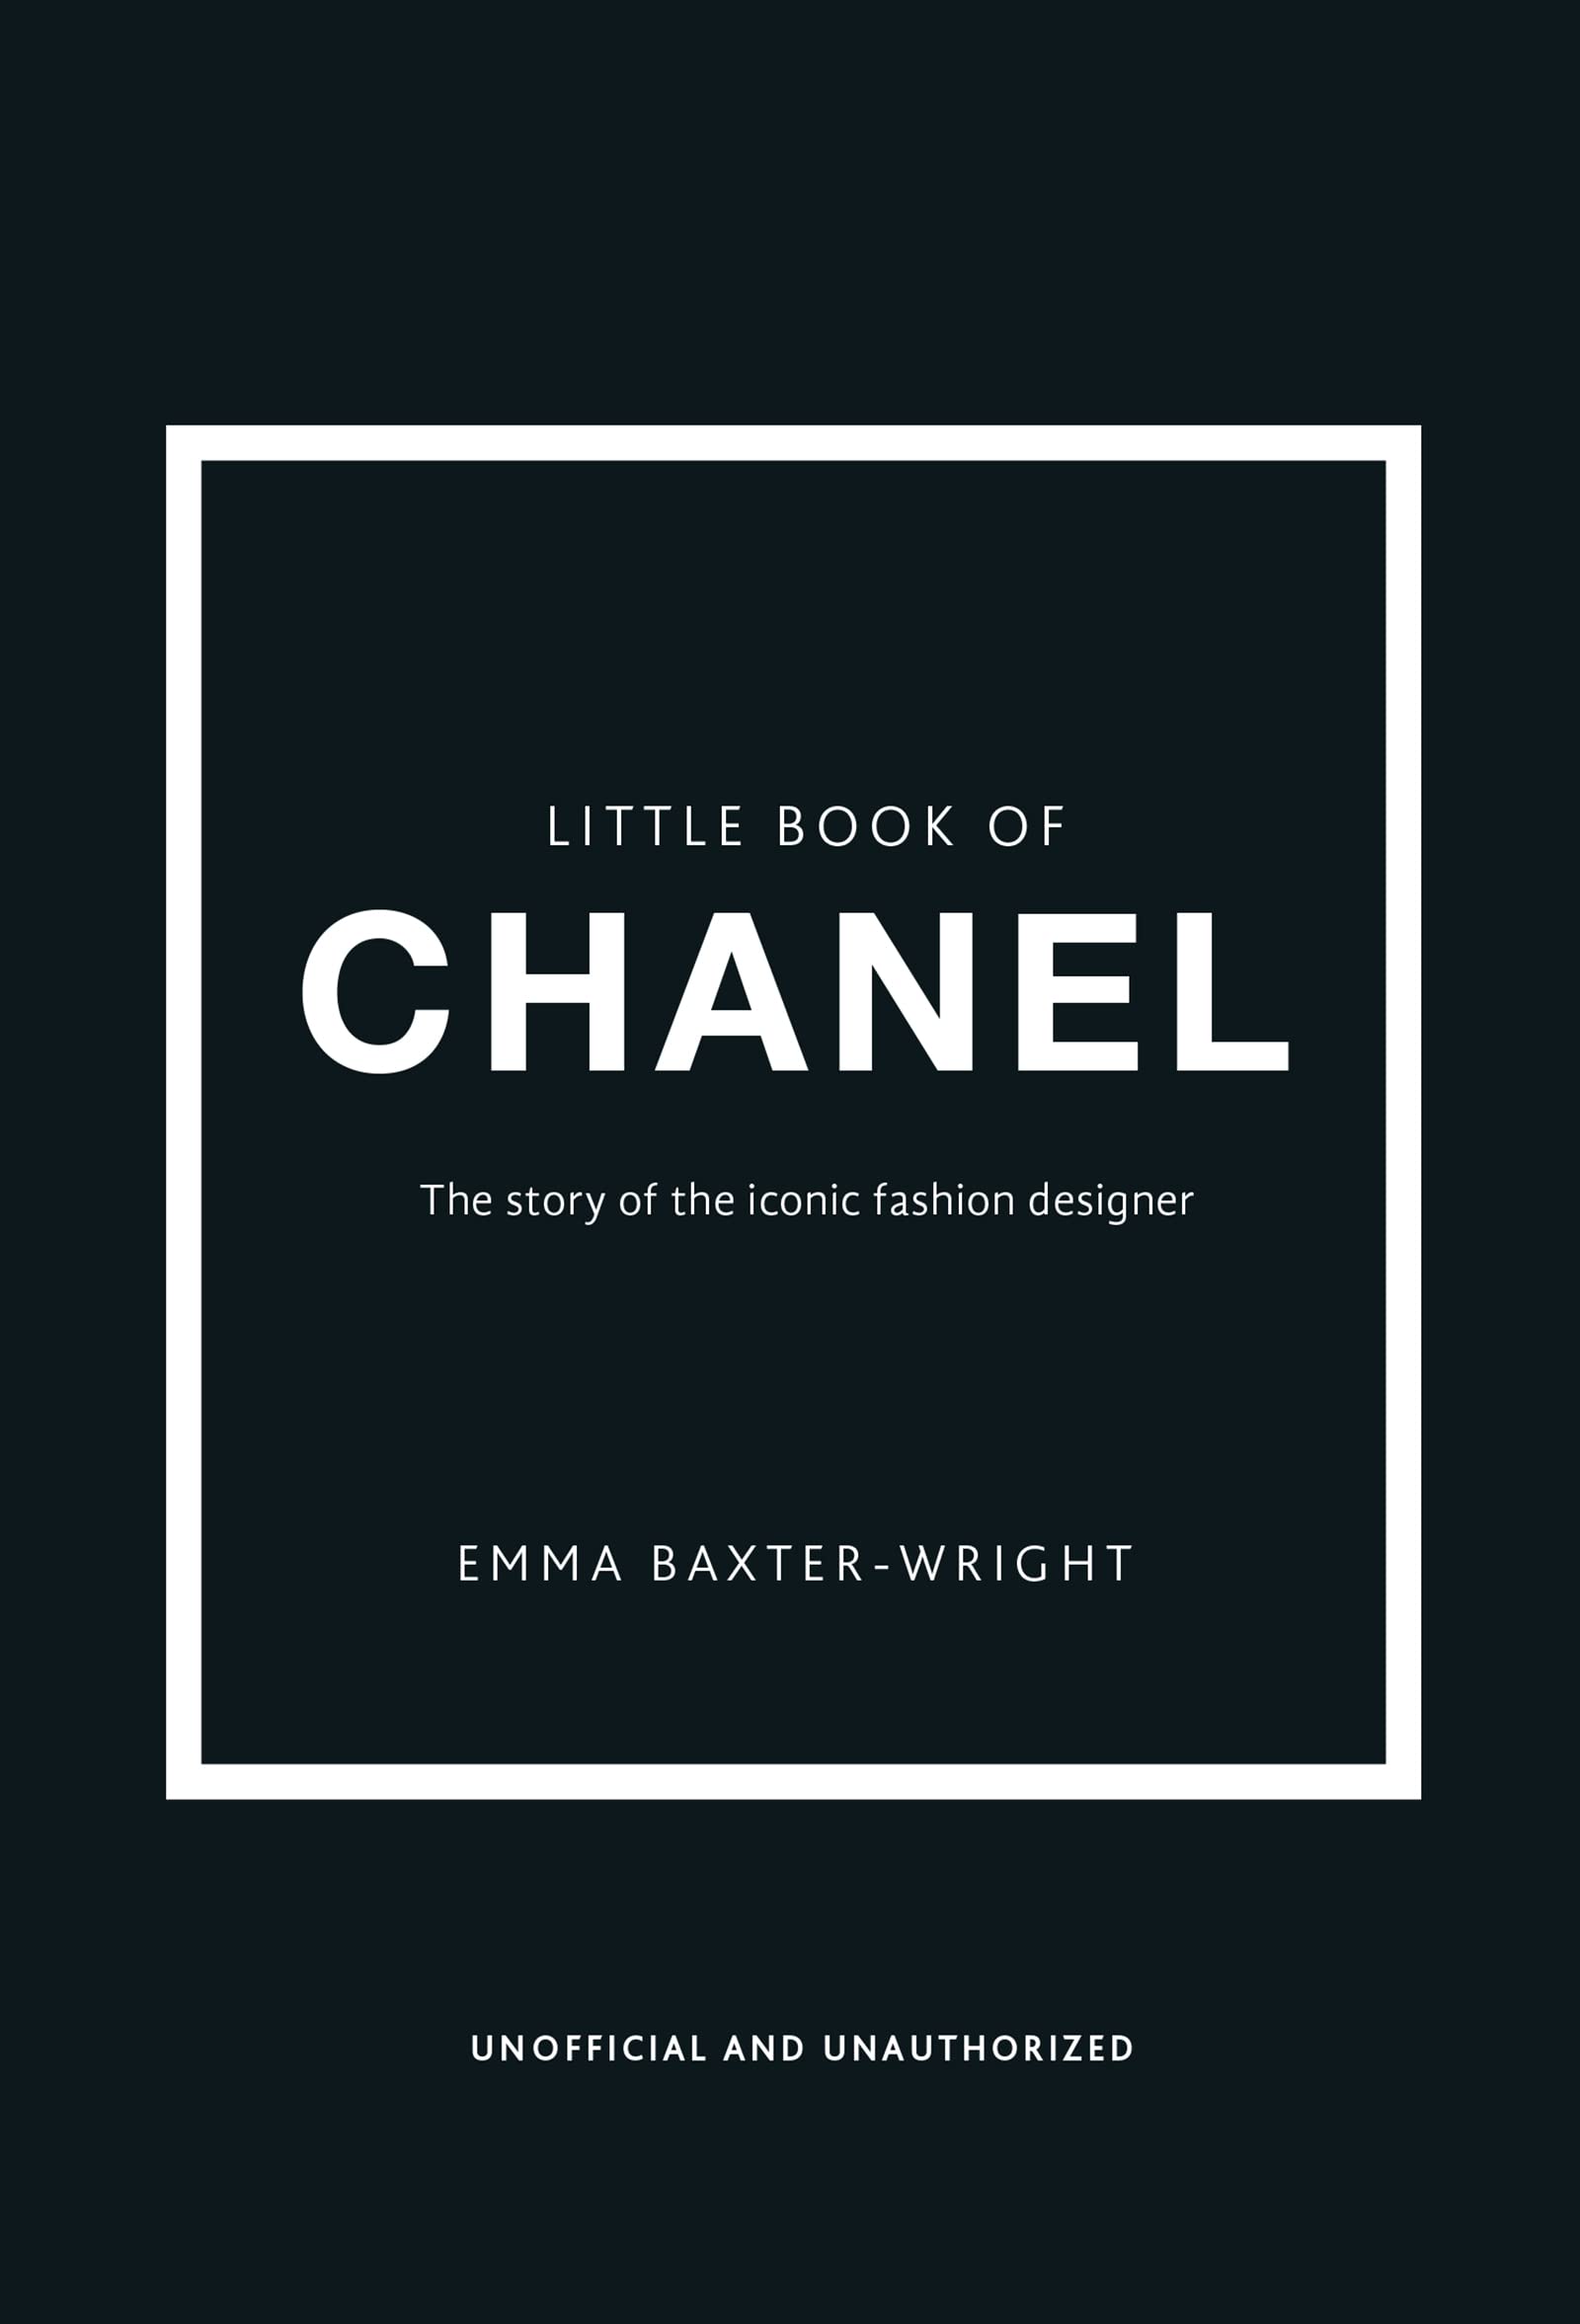 The Little Book of Chanel (Hardcover)